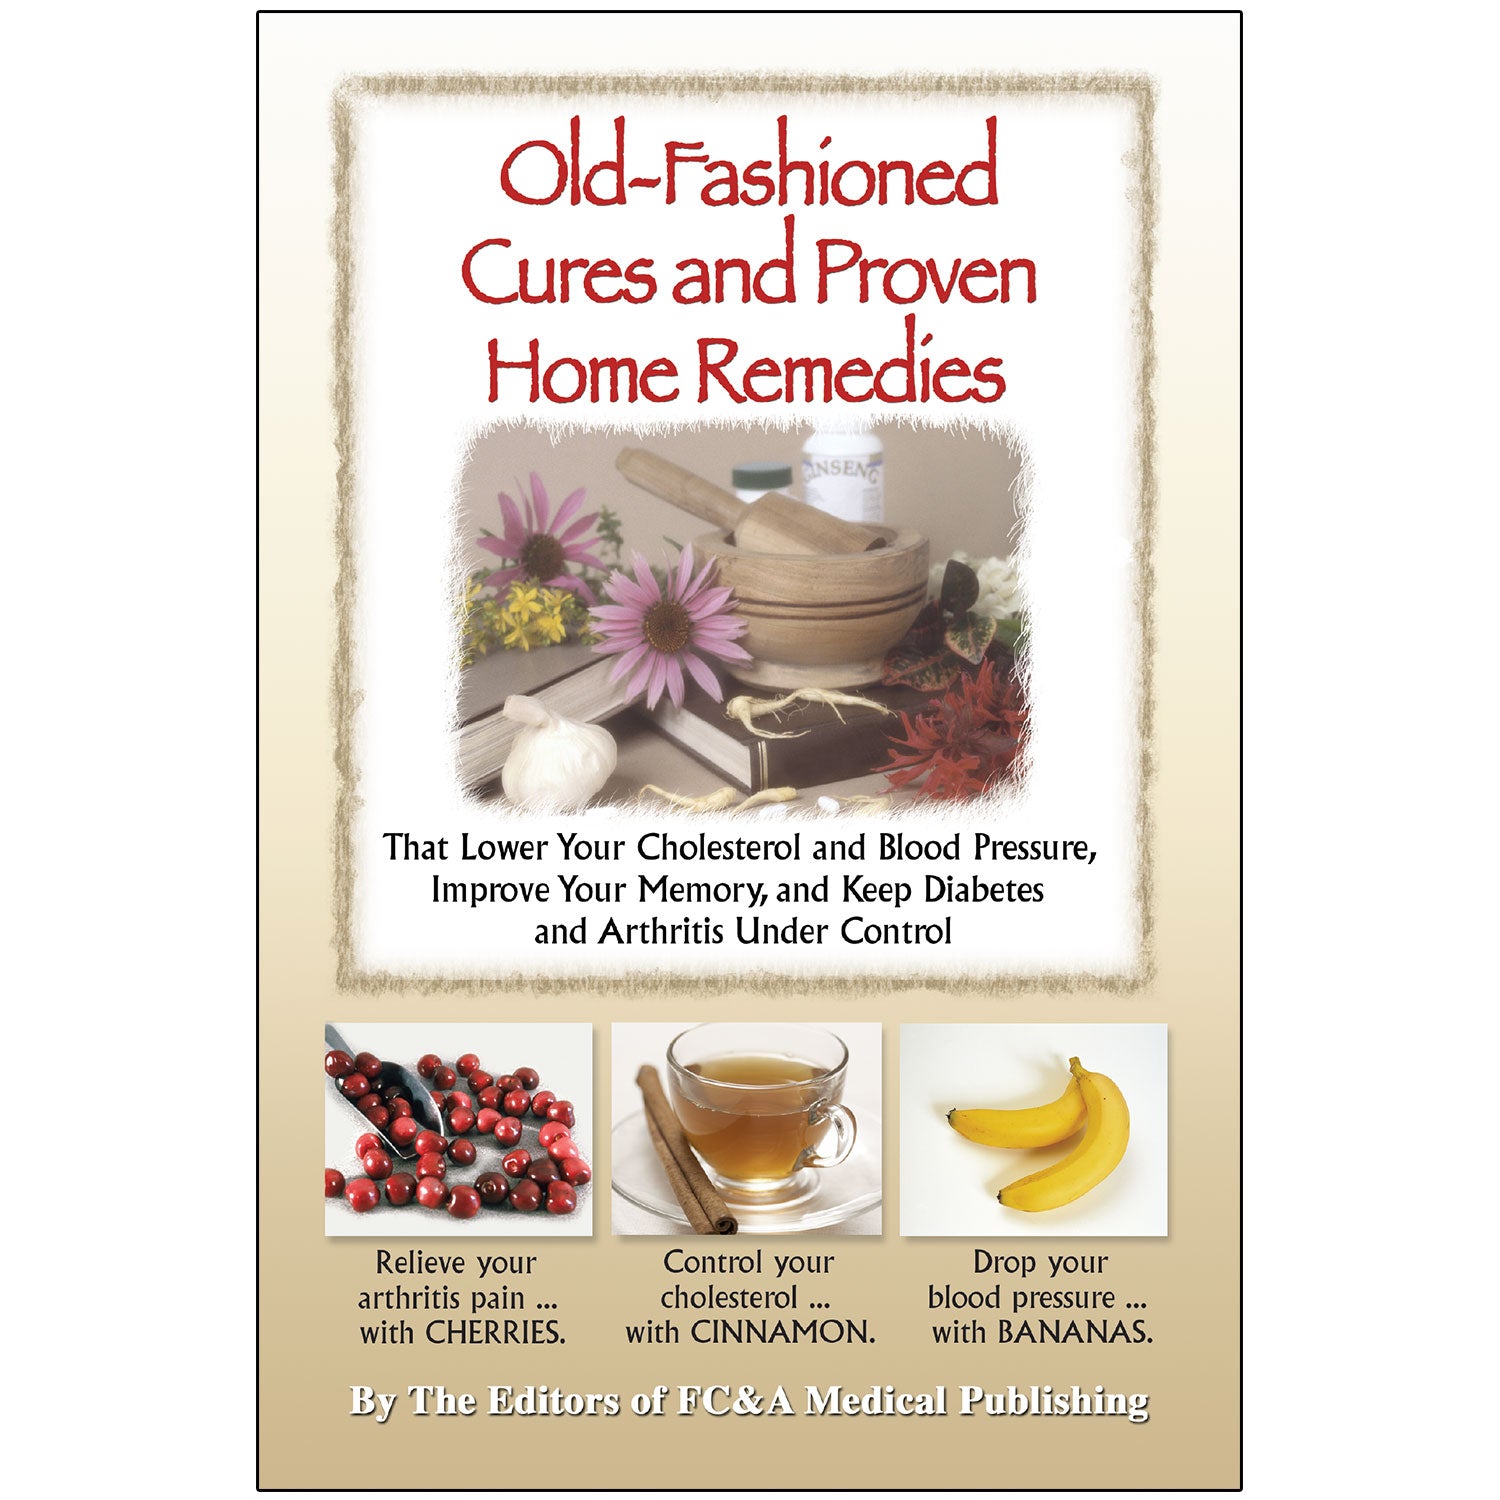 OldFashioned Cures and Proven Home Remedies FC&A Store